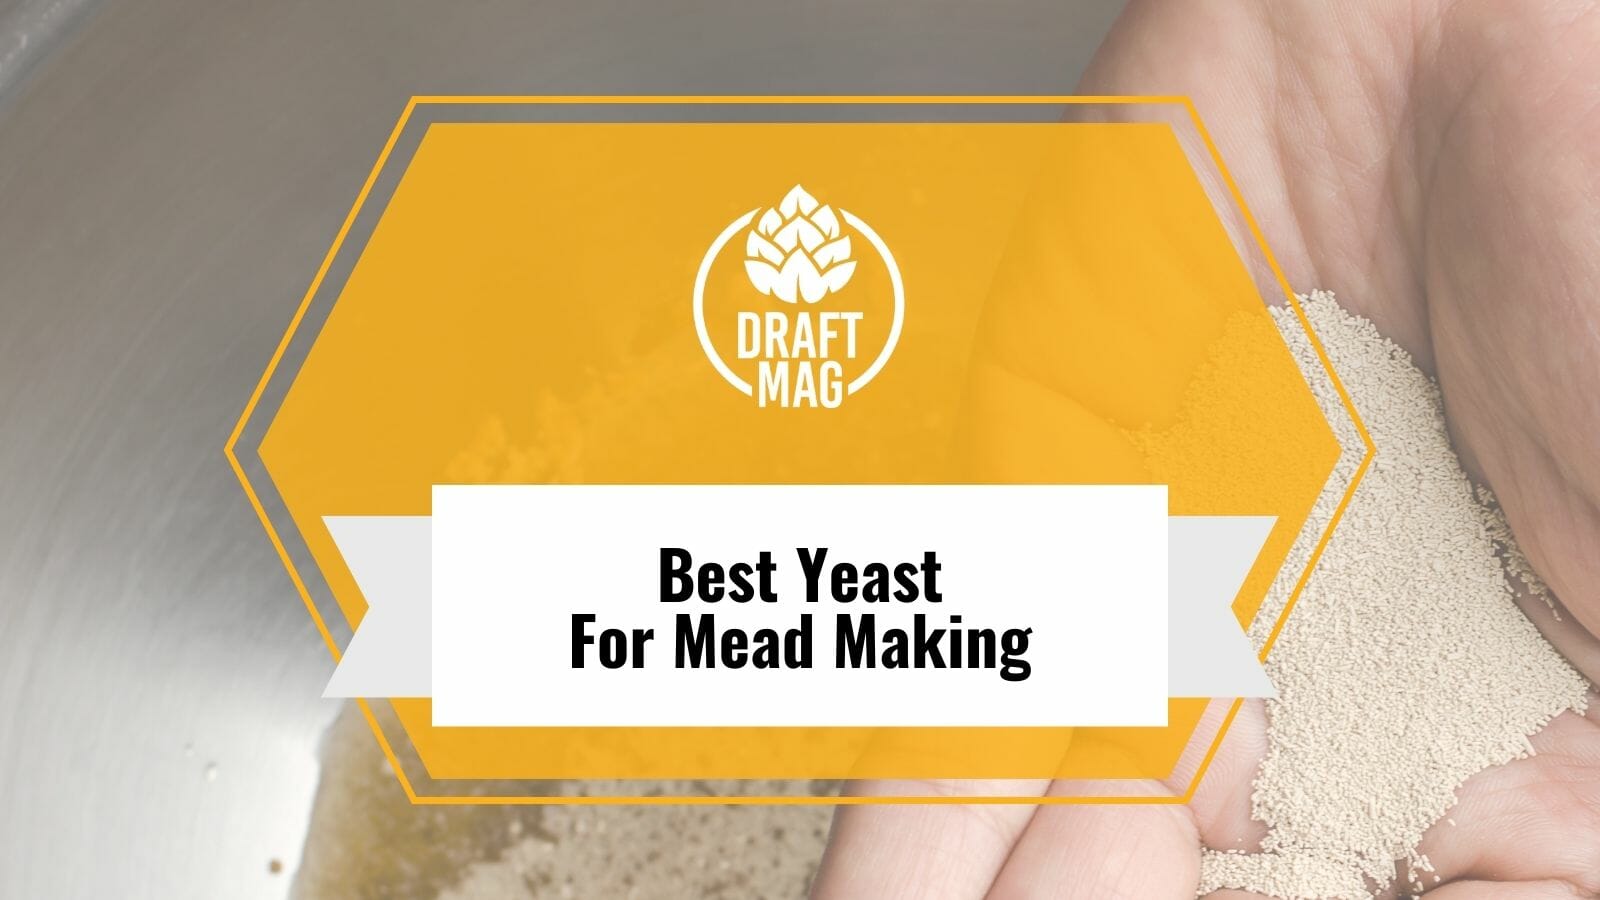 11 Best Yeast for Mead Making